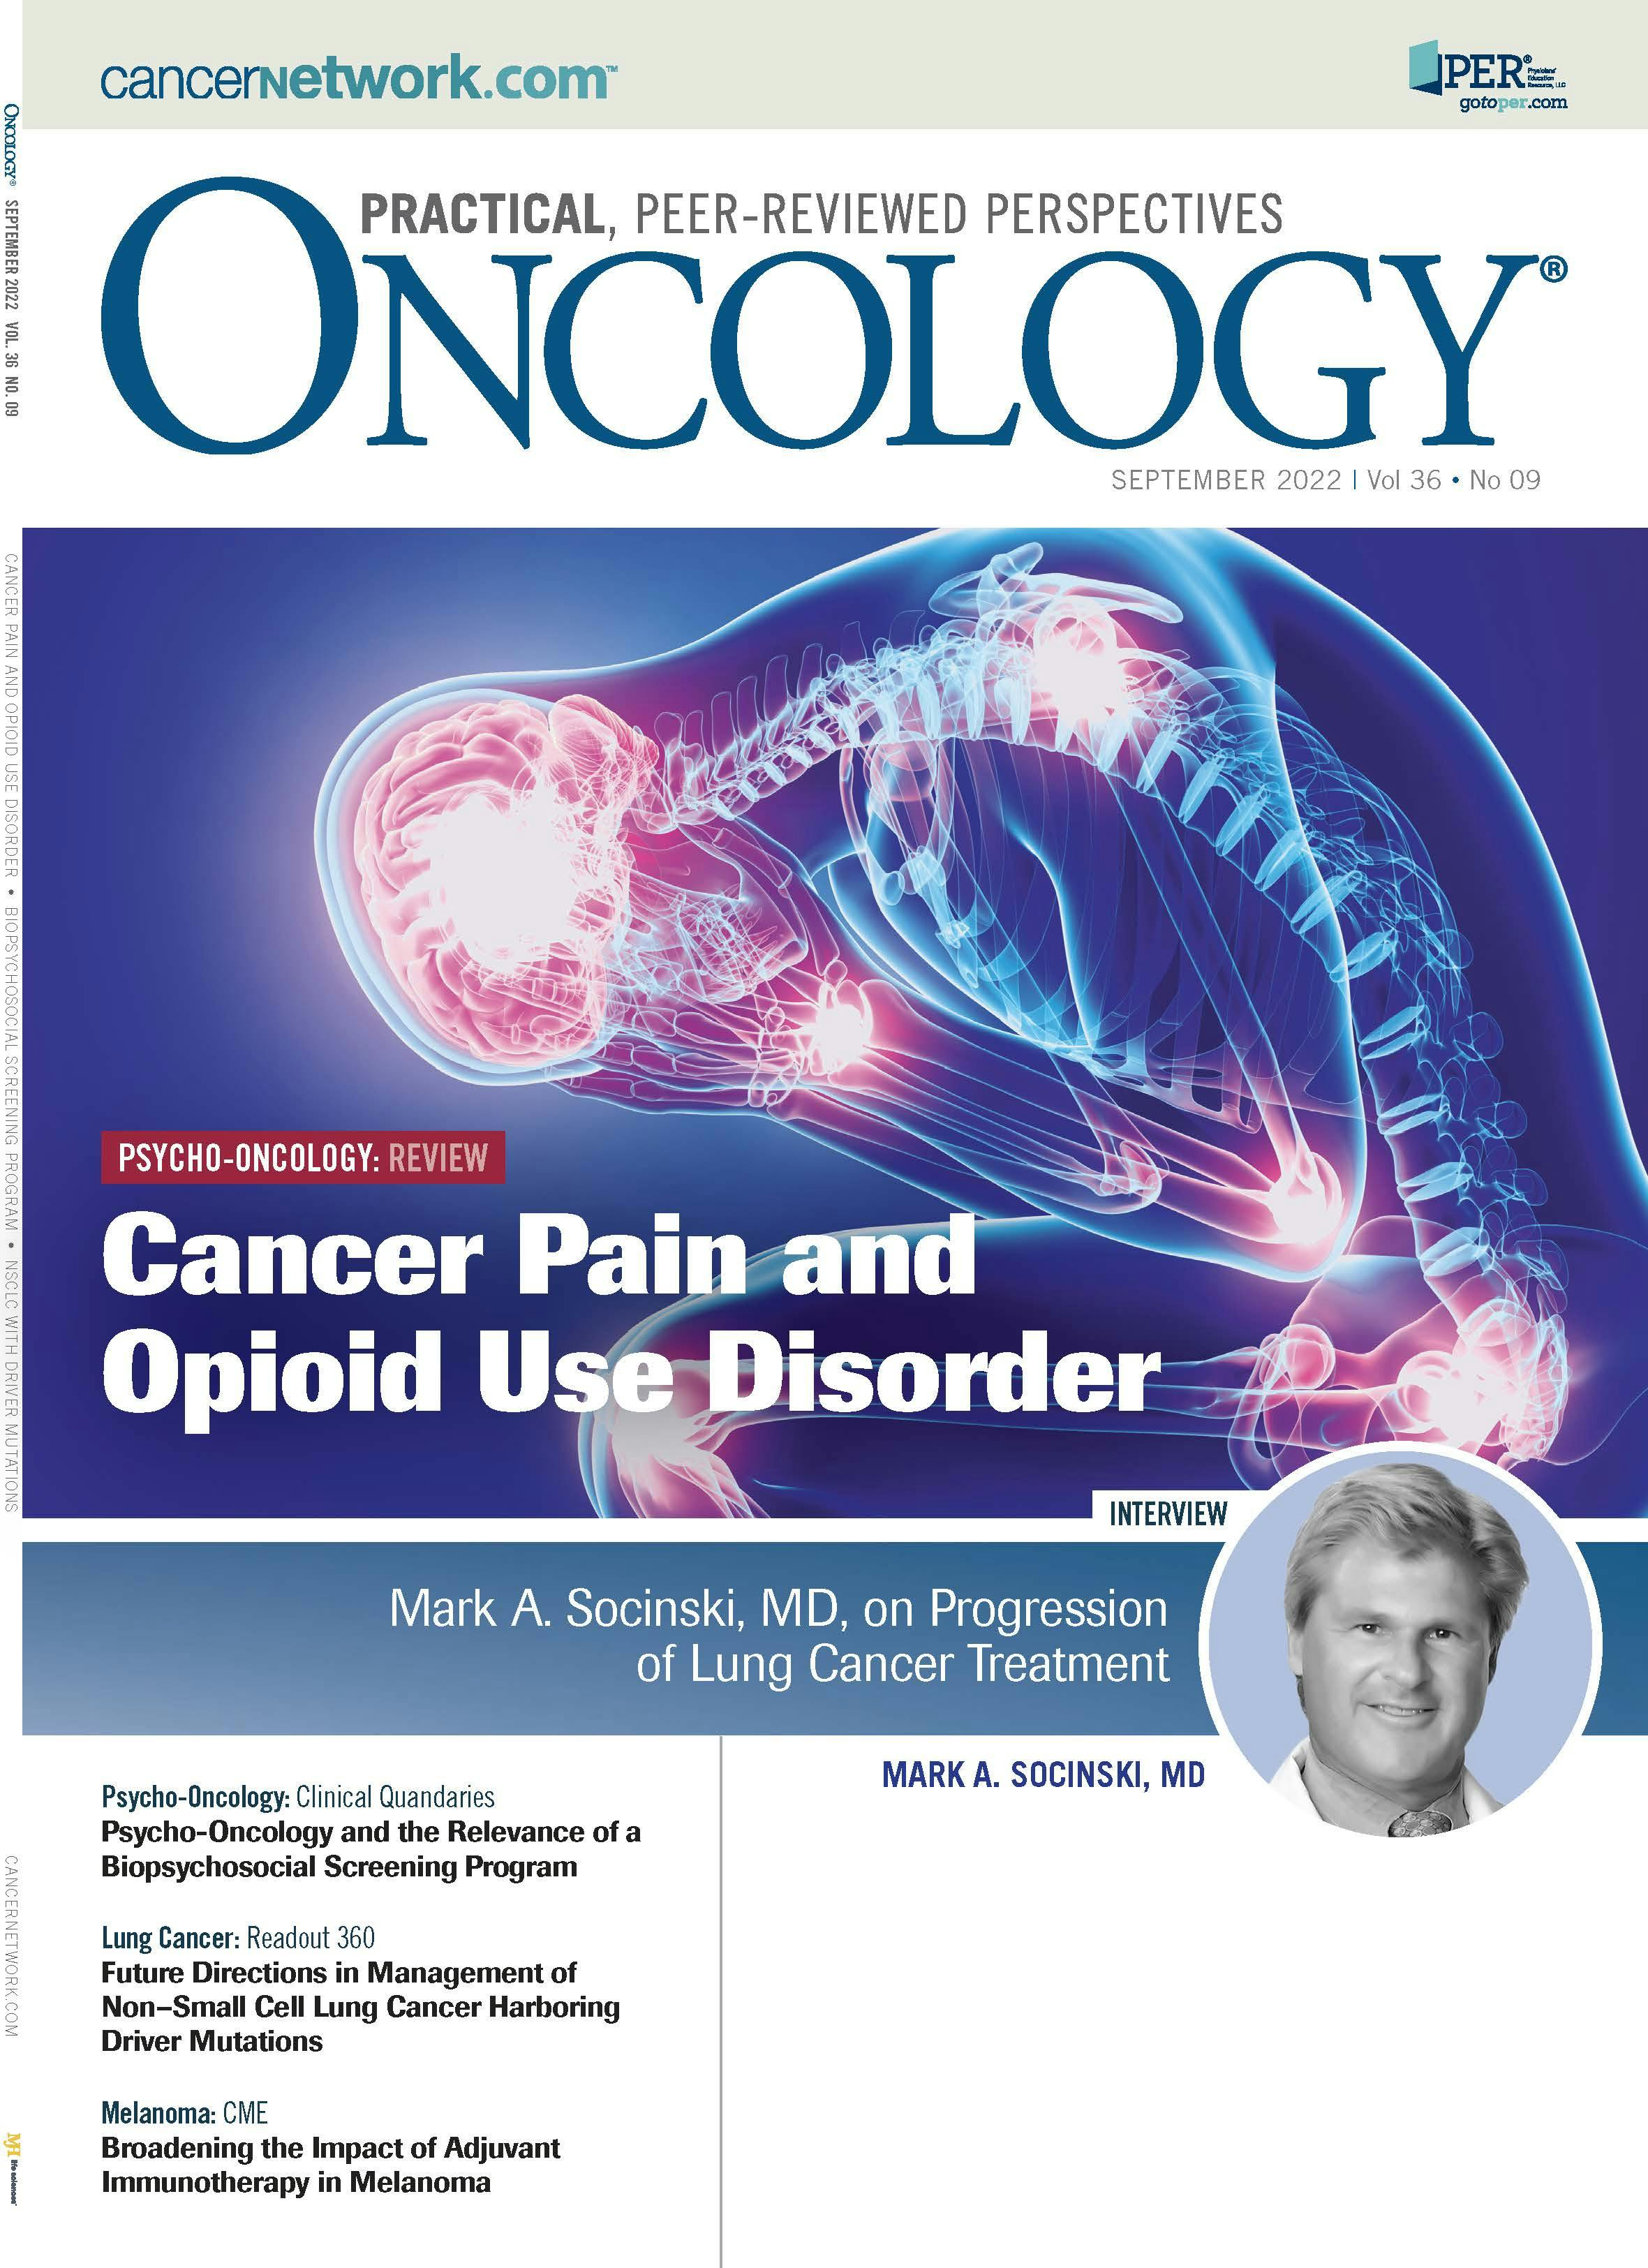 ONCOLOGY Vol 36, Issue 9